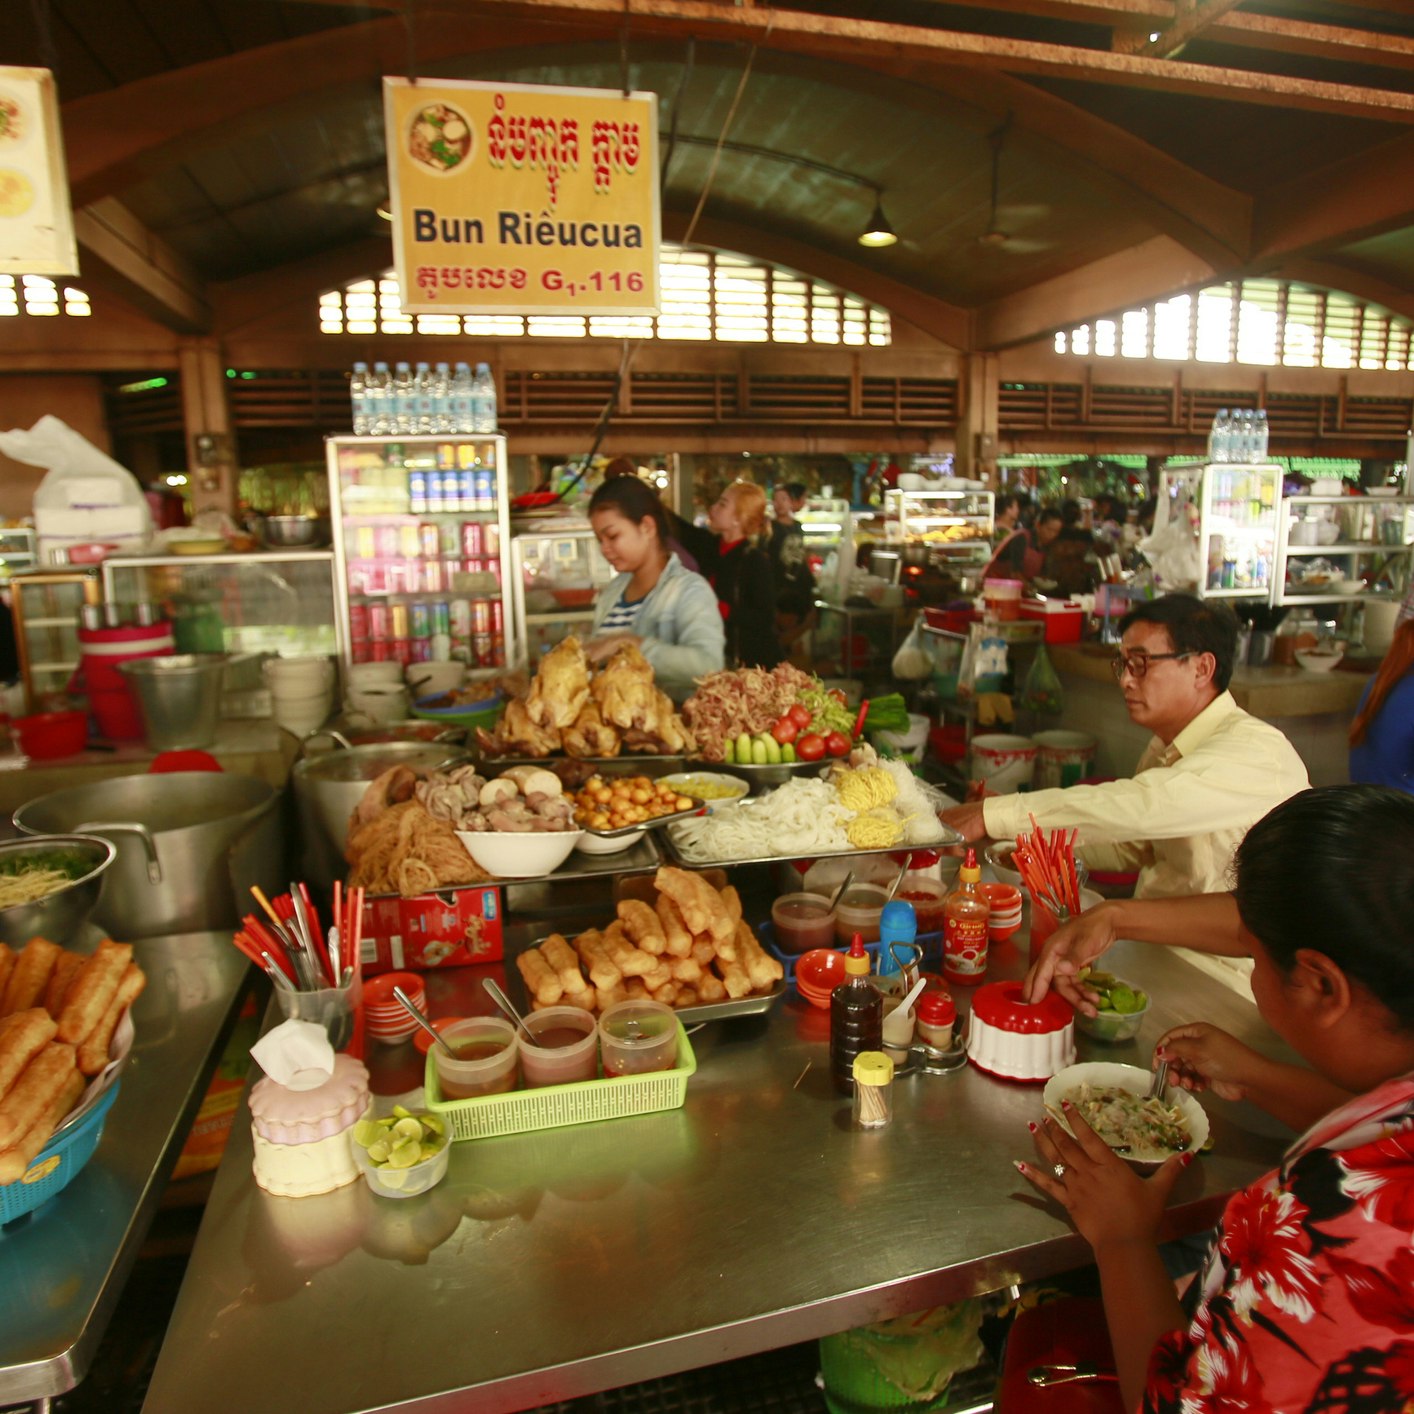 Dining at street food markets in cities like Phnom Penh is a great way to save money